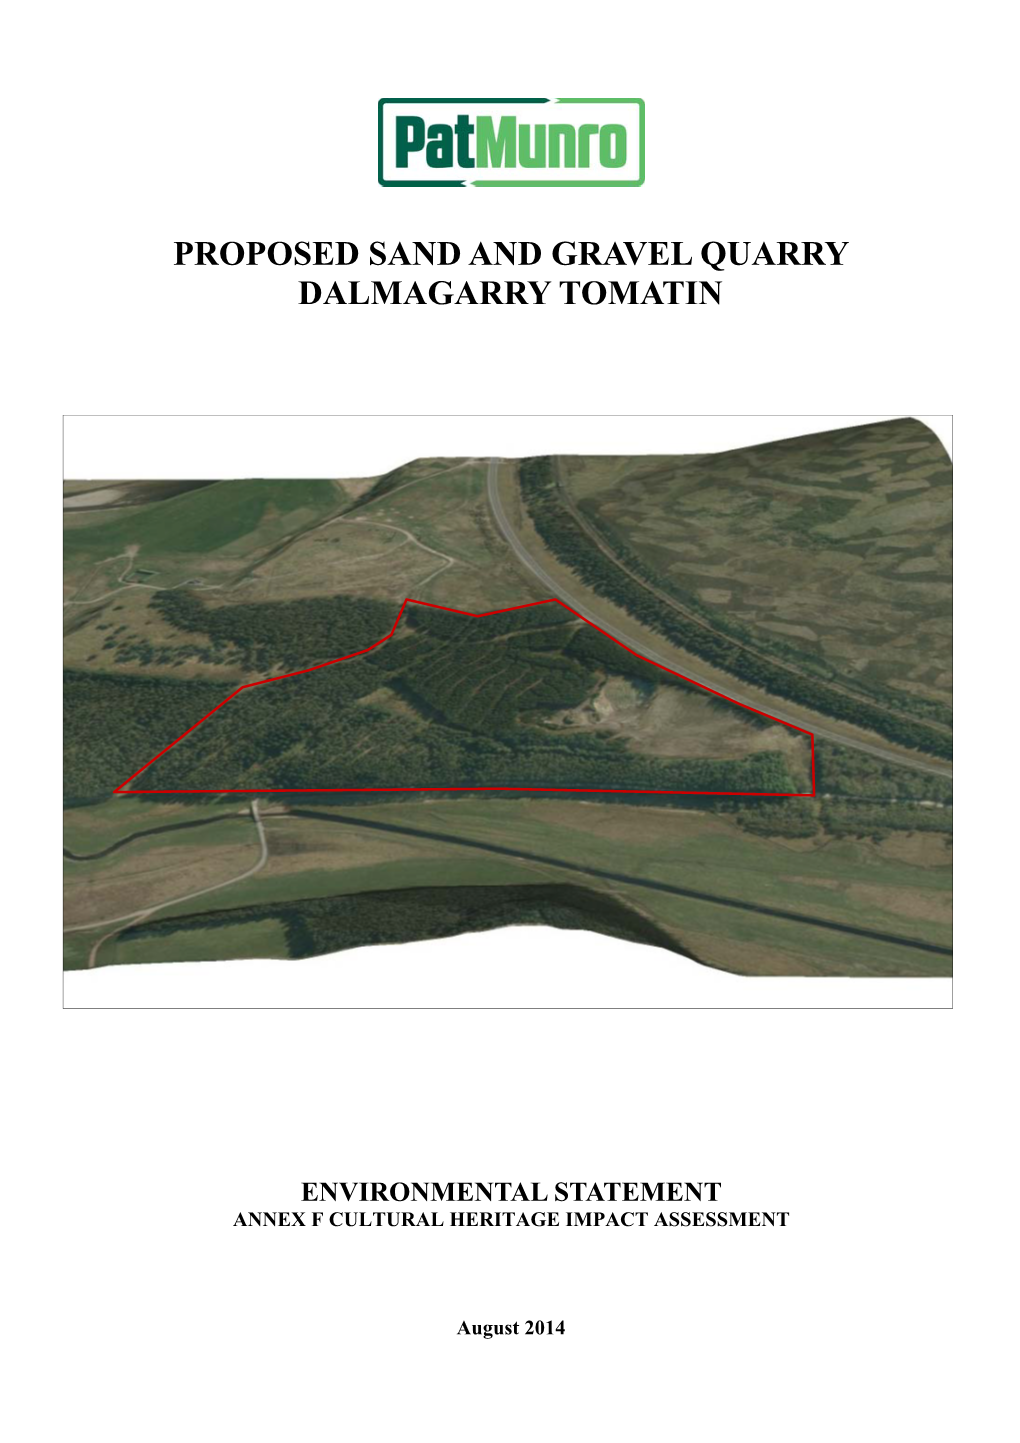 Proposed Sand and Gravel Quarry Dalmagarry Tomatin